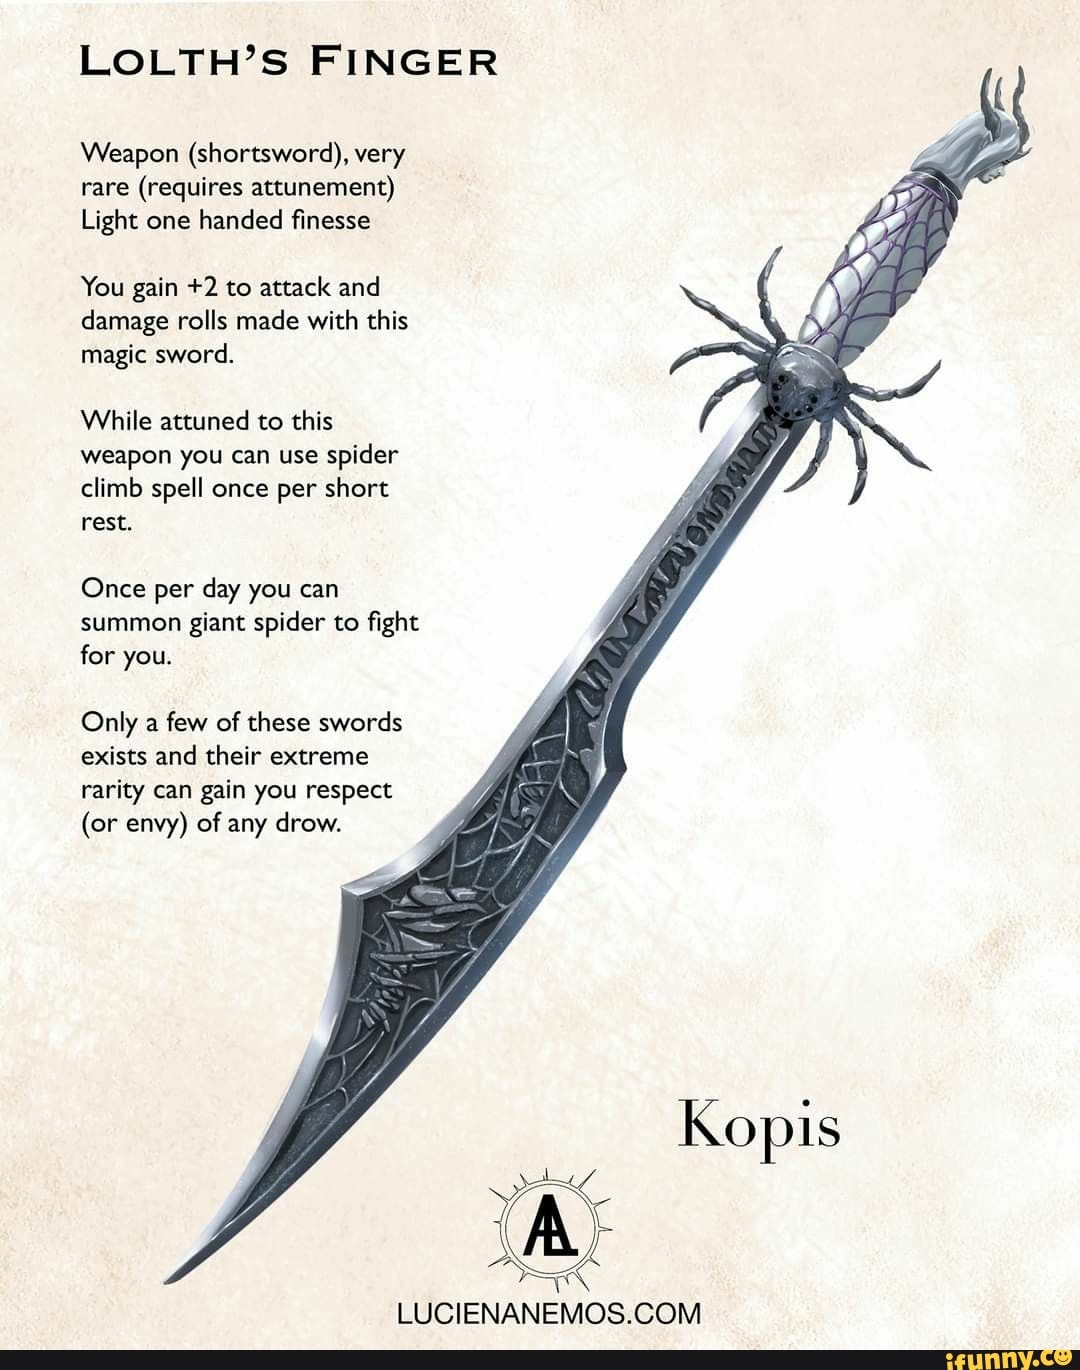 LOLTH'S FINGER Weapon (shortsword), very rare (requires attunement